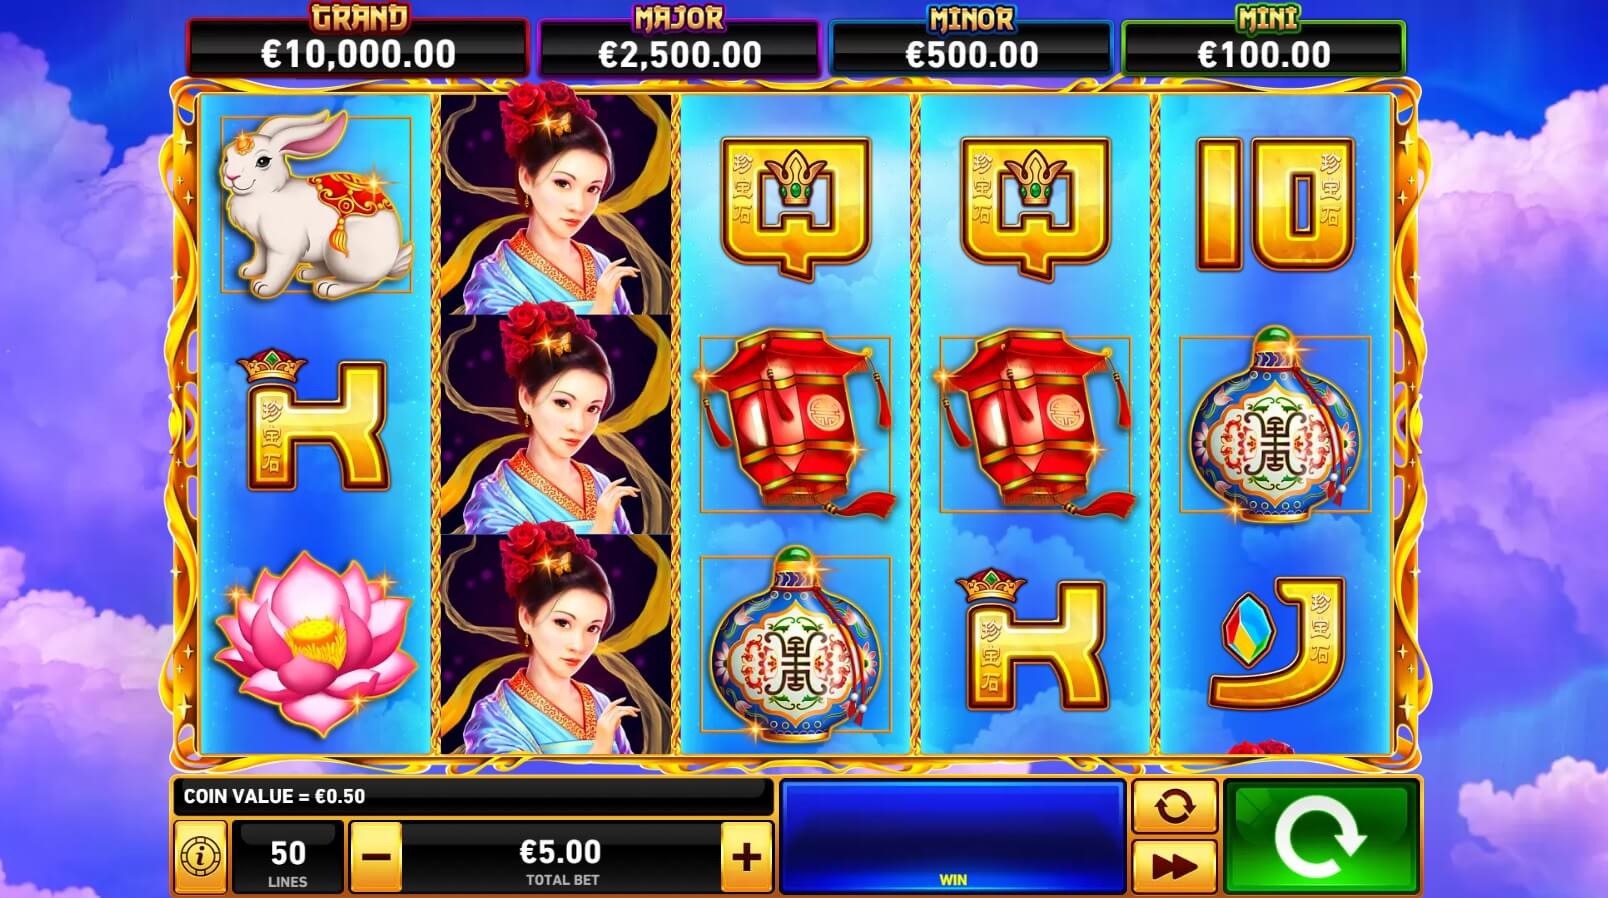 The Eternal Lady slot appeared in the online casino